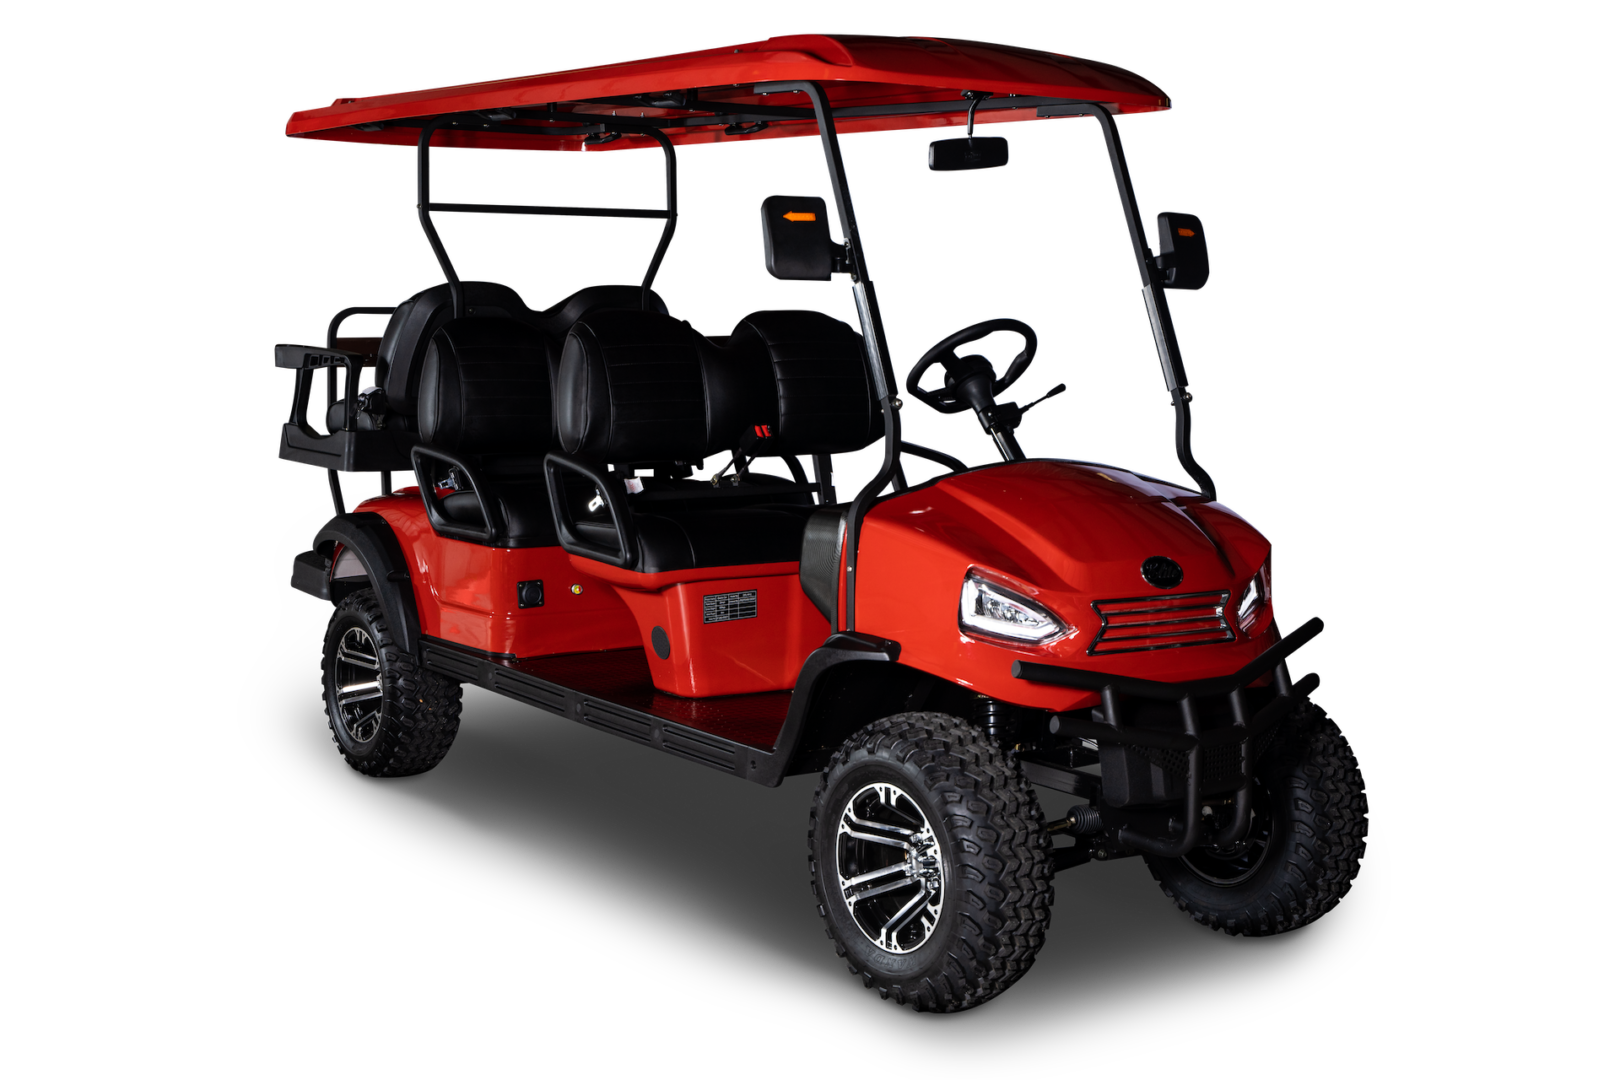 A red golf cart is shown on the ground.